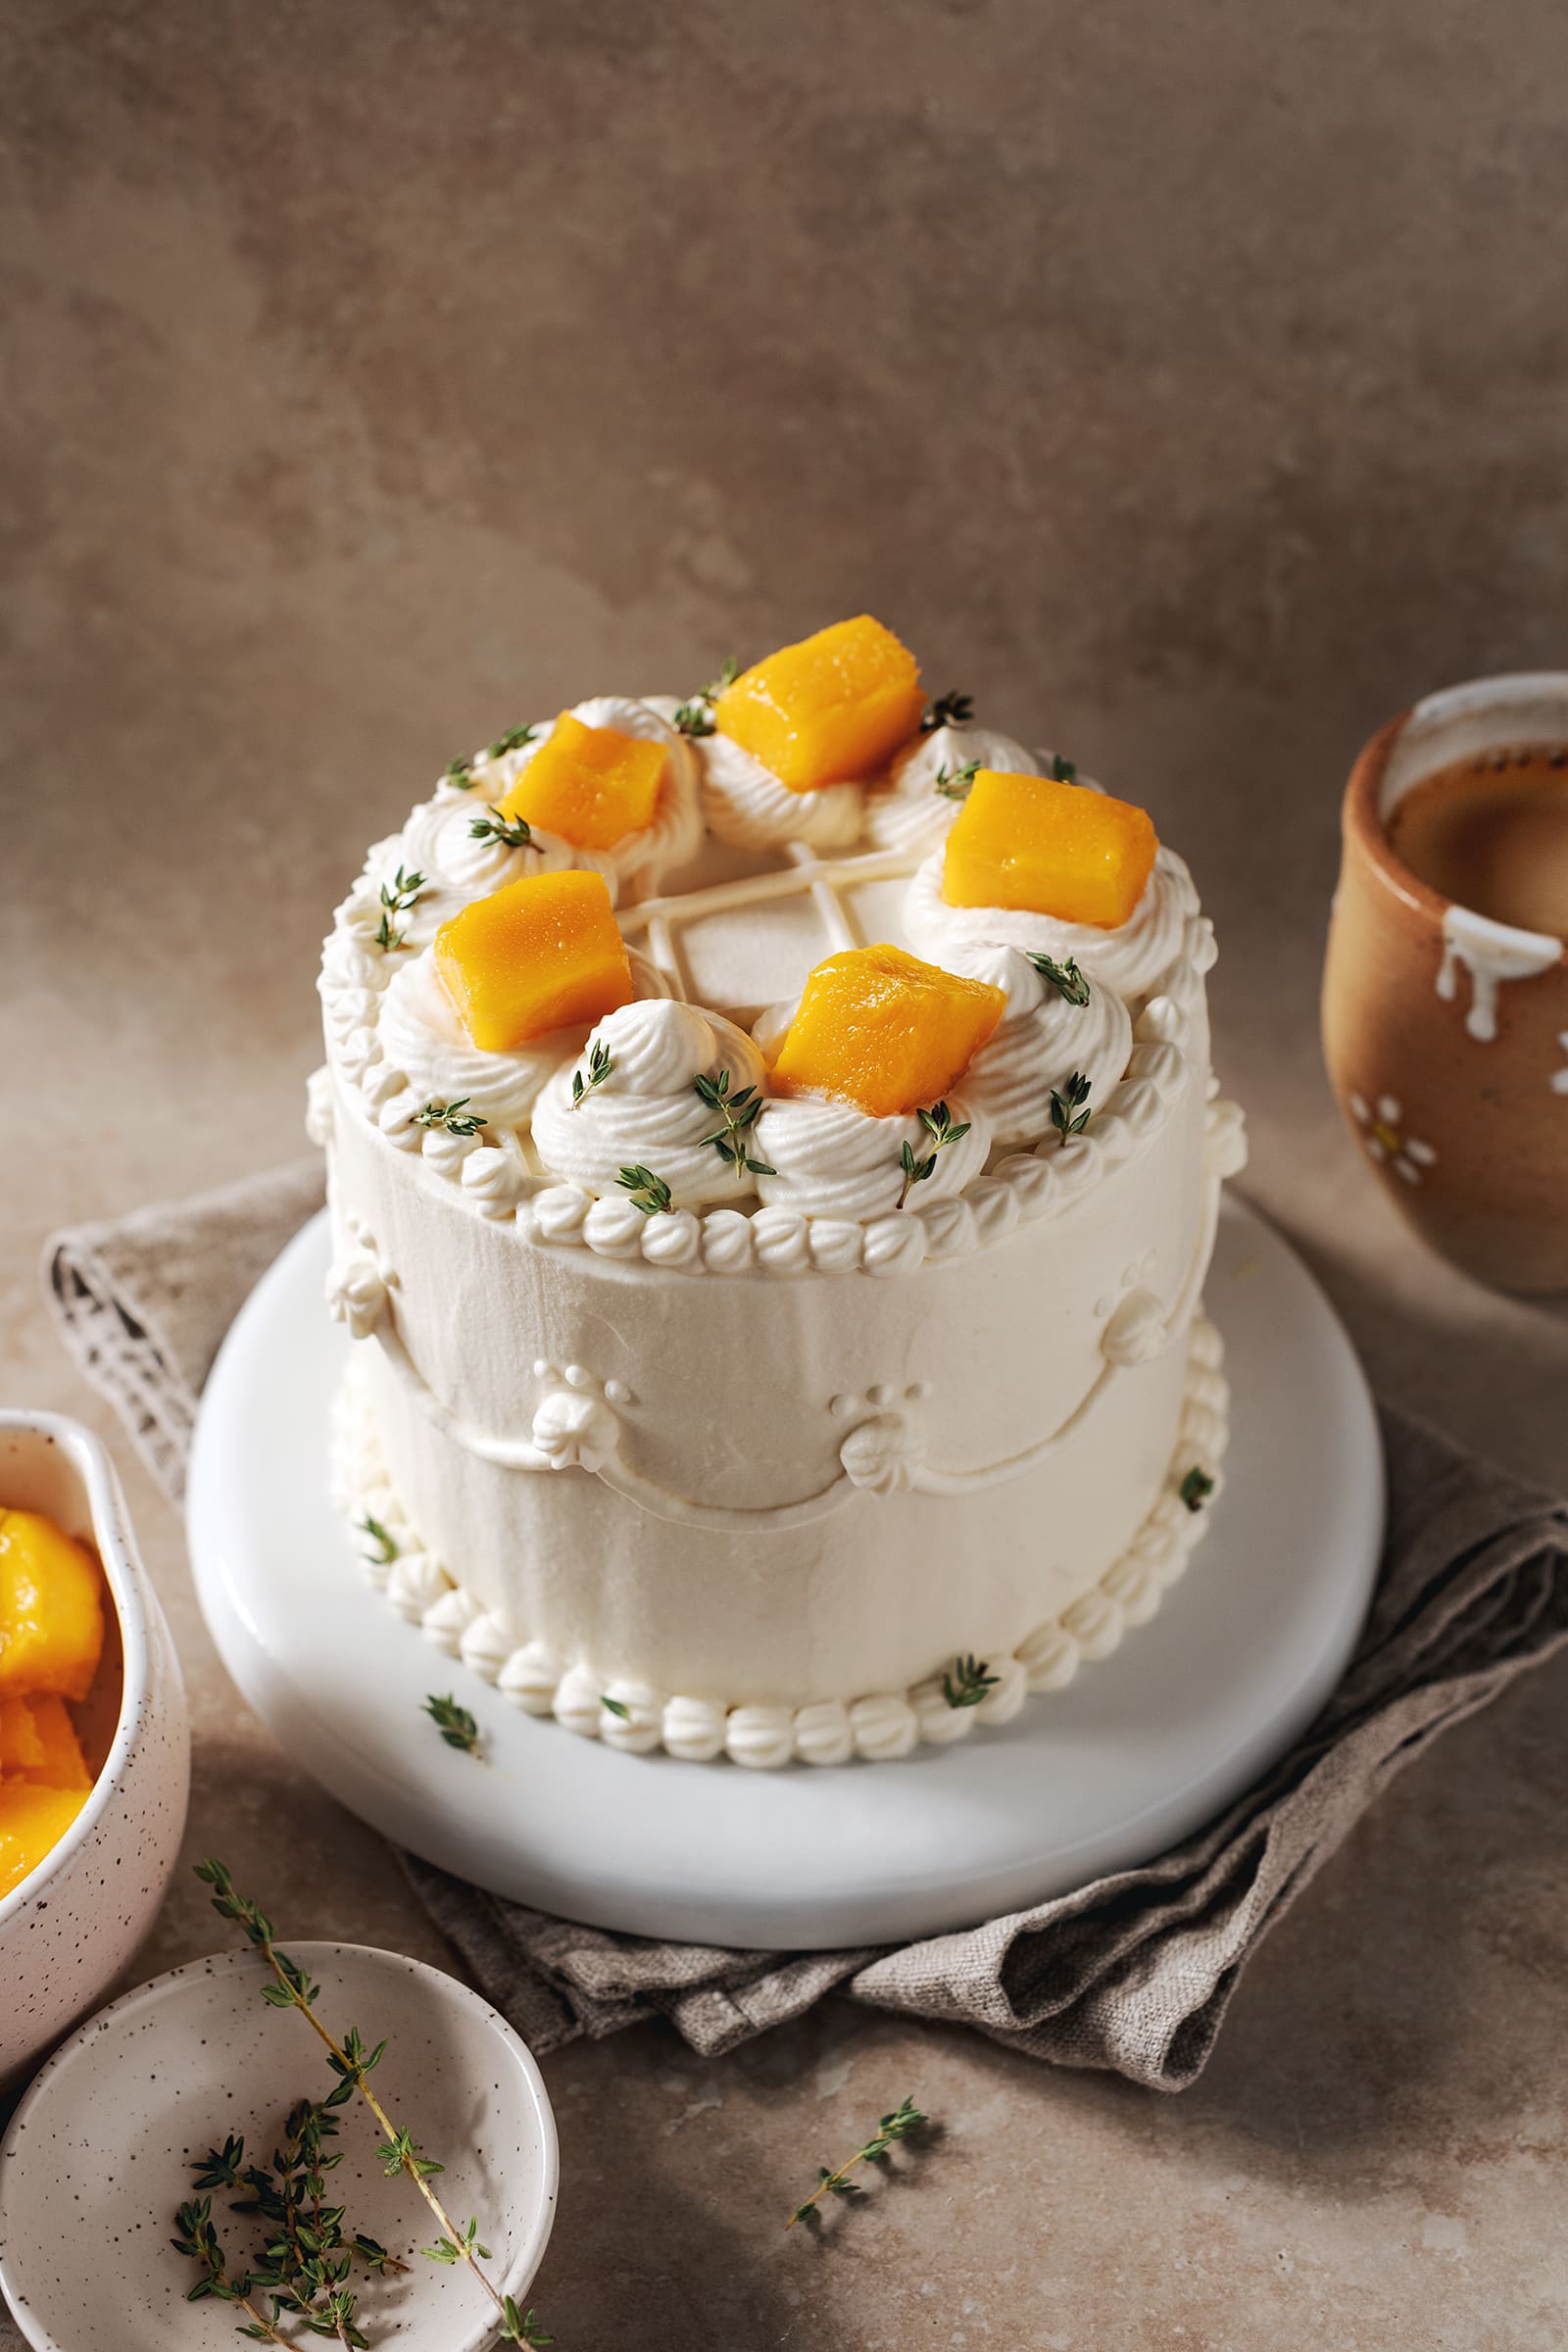 Cake covered with whipped cream and topped with mango chunks sits on a white plate.